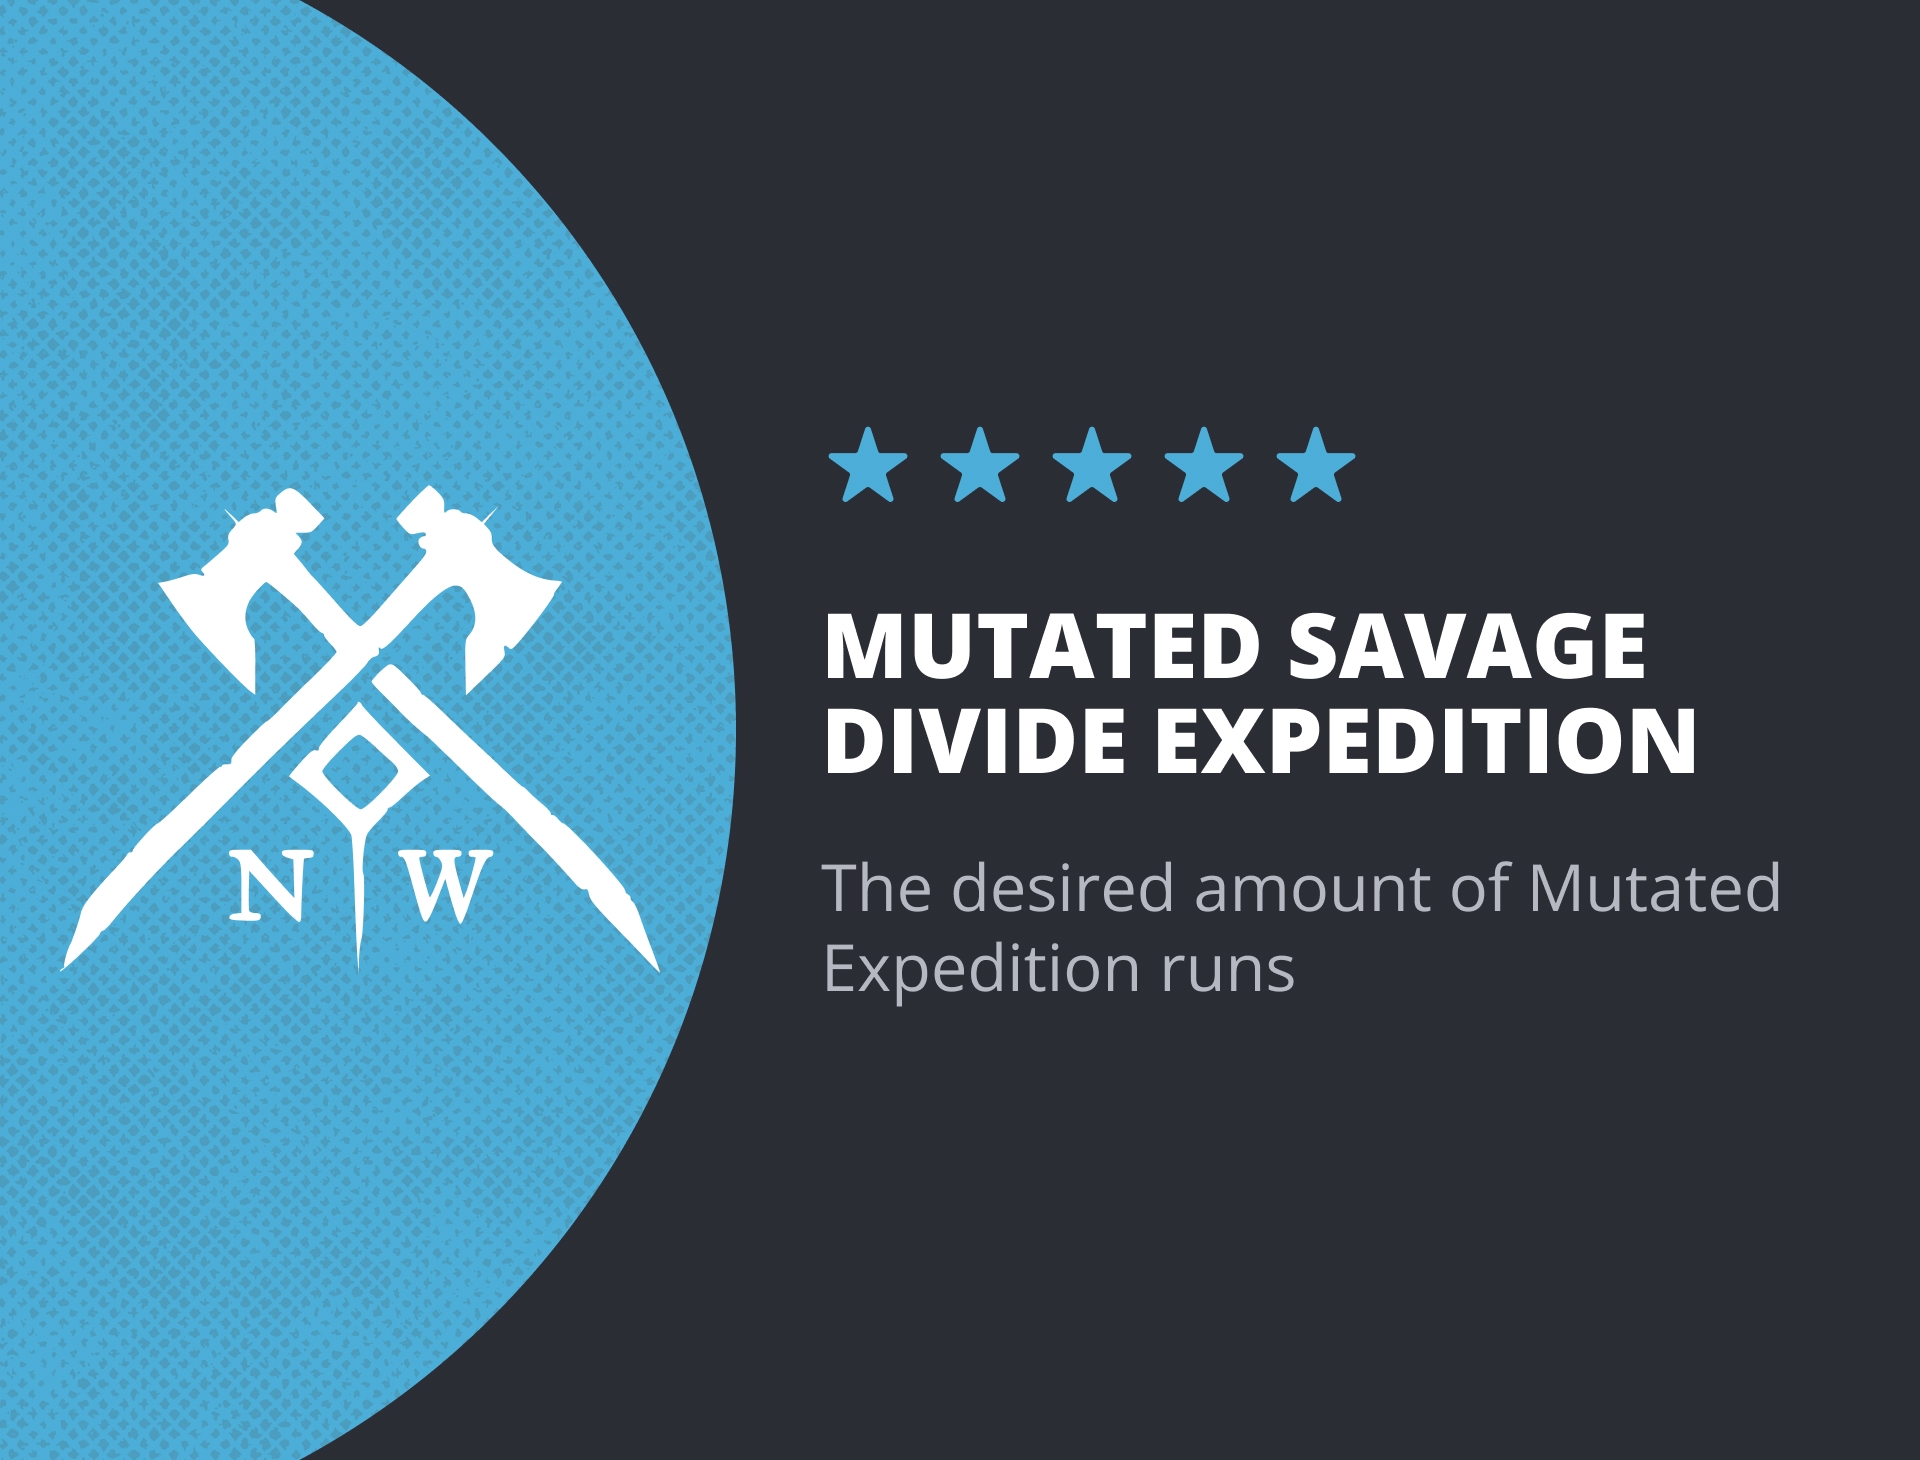 Mutated Savage Divide Expedition